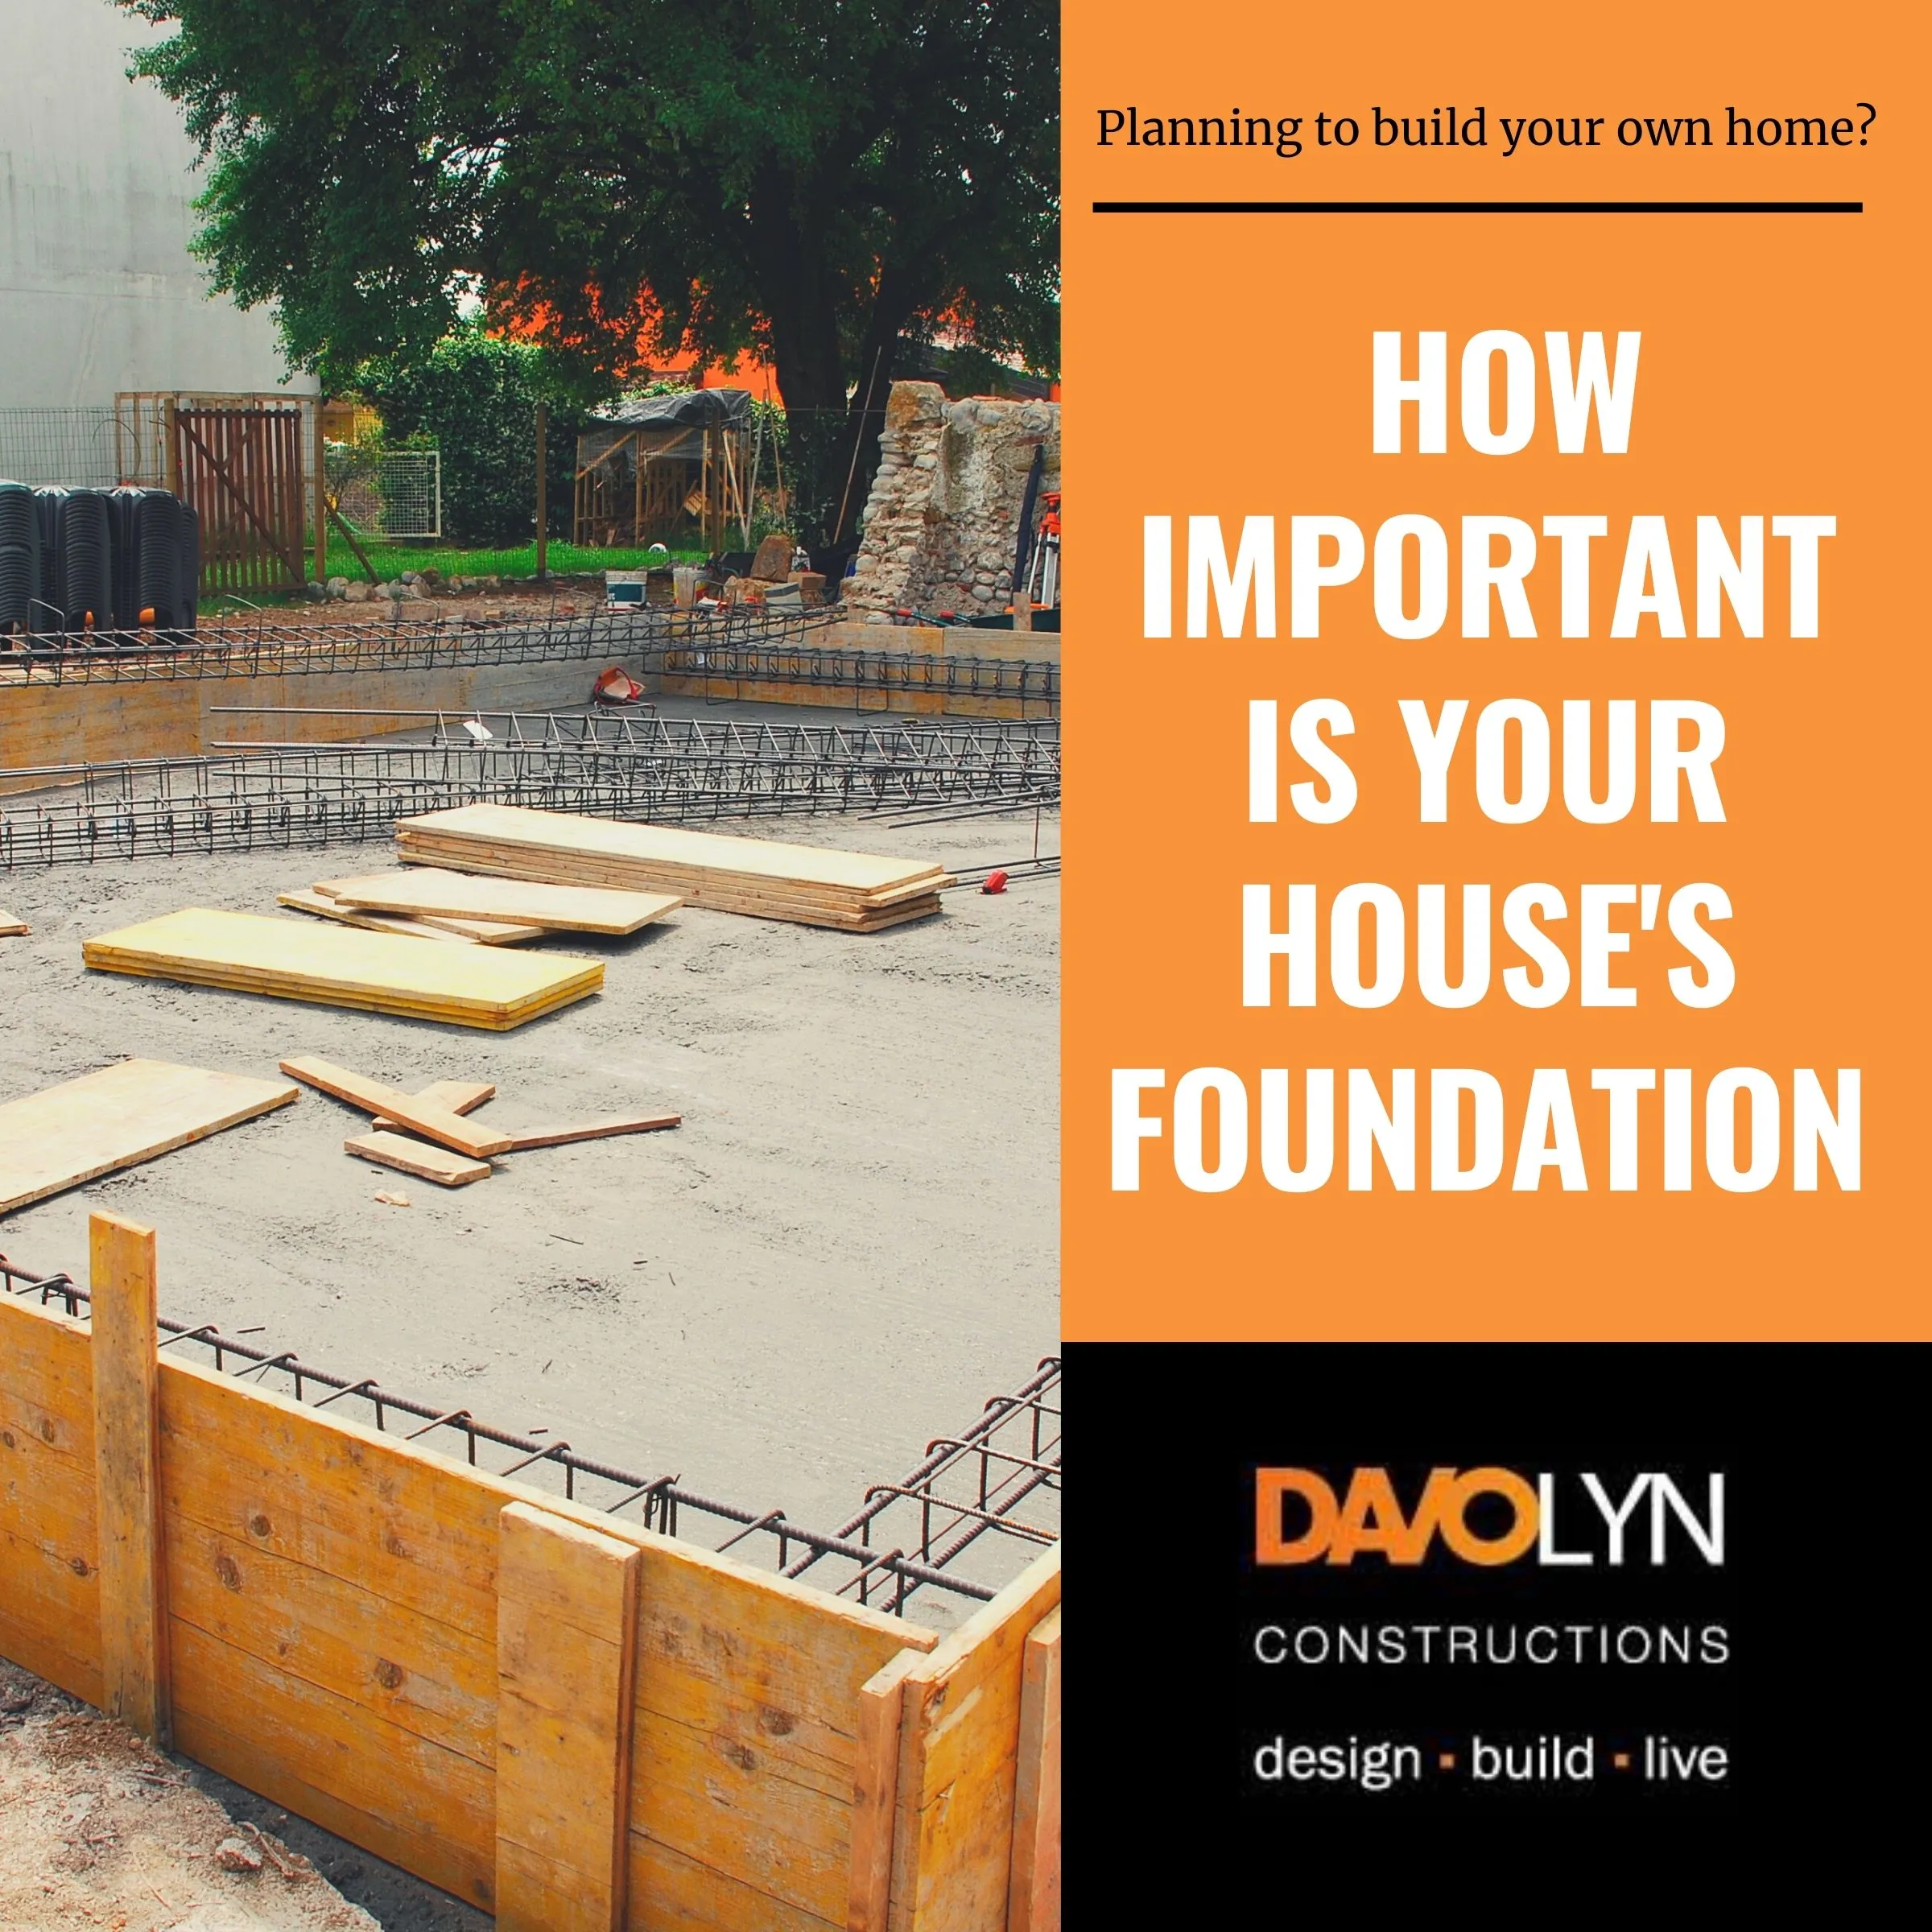 It’s All About The Foundation: What Makes a Quality Home